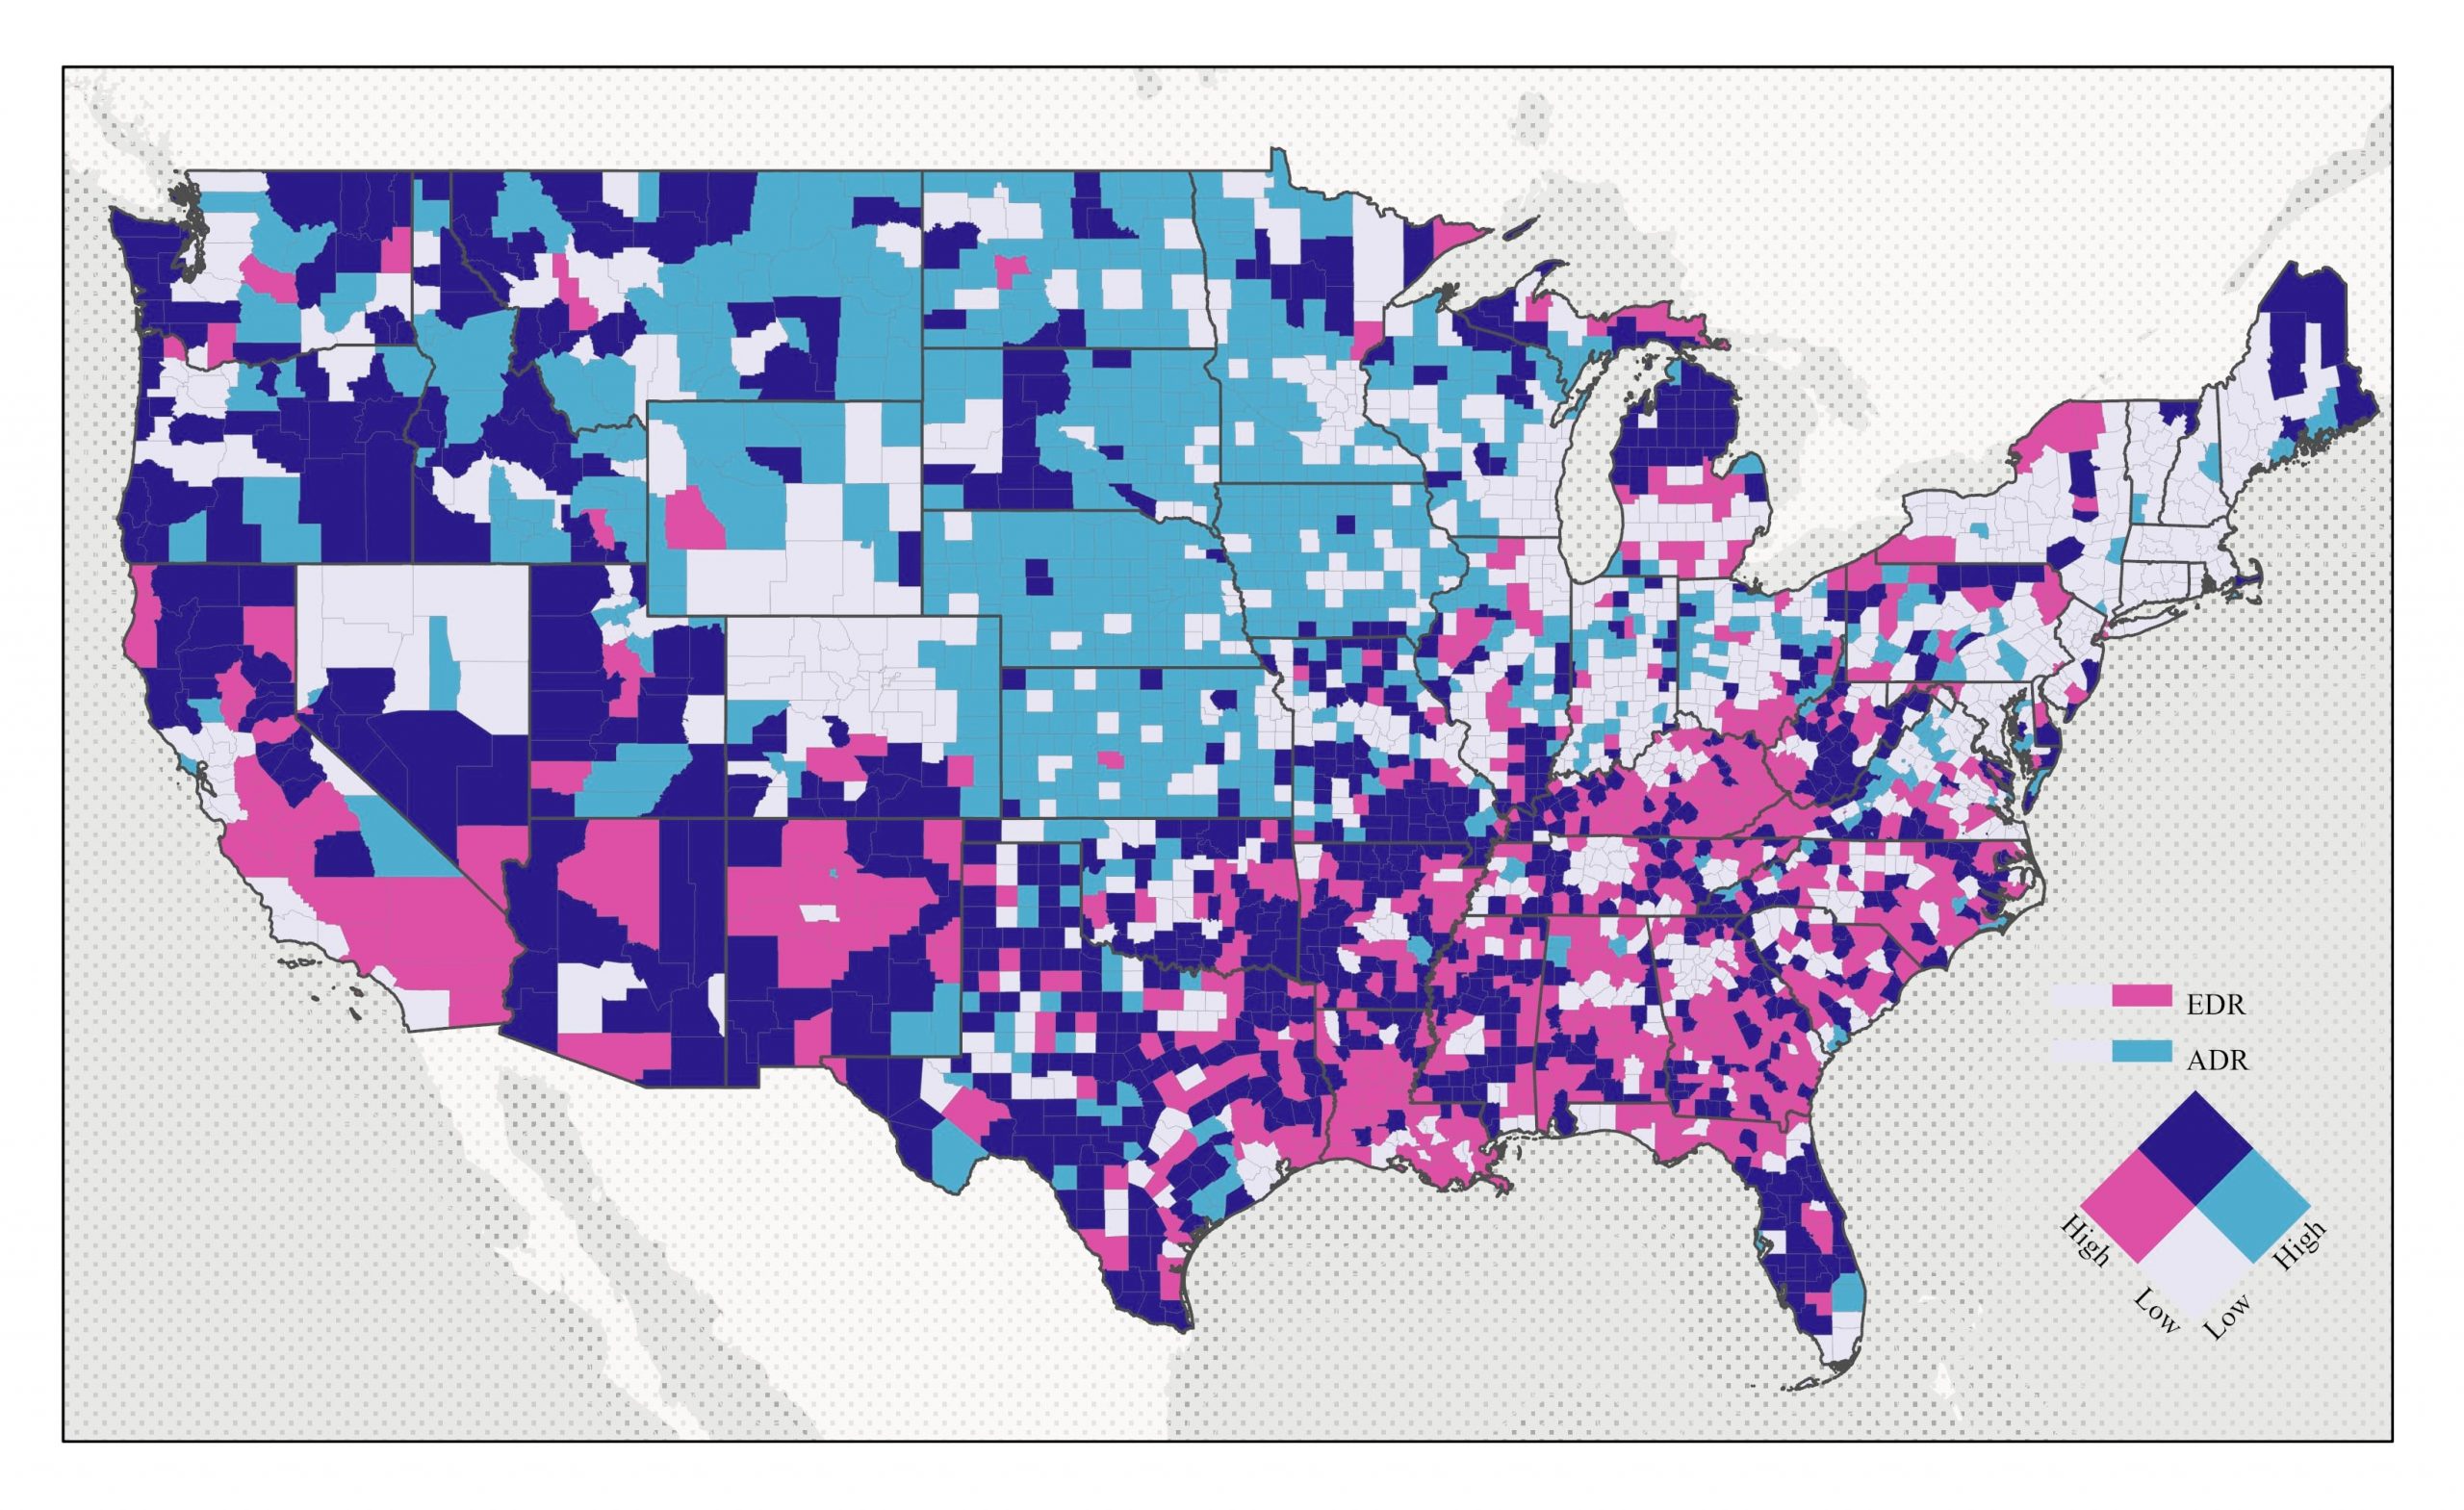 County-level US relationship map displaying how the ADR and EDR values compare to each other.